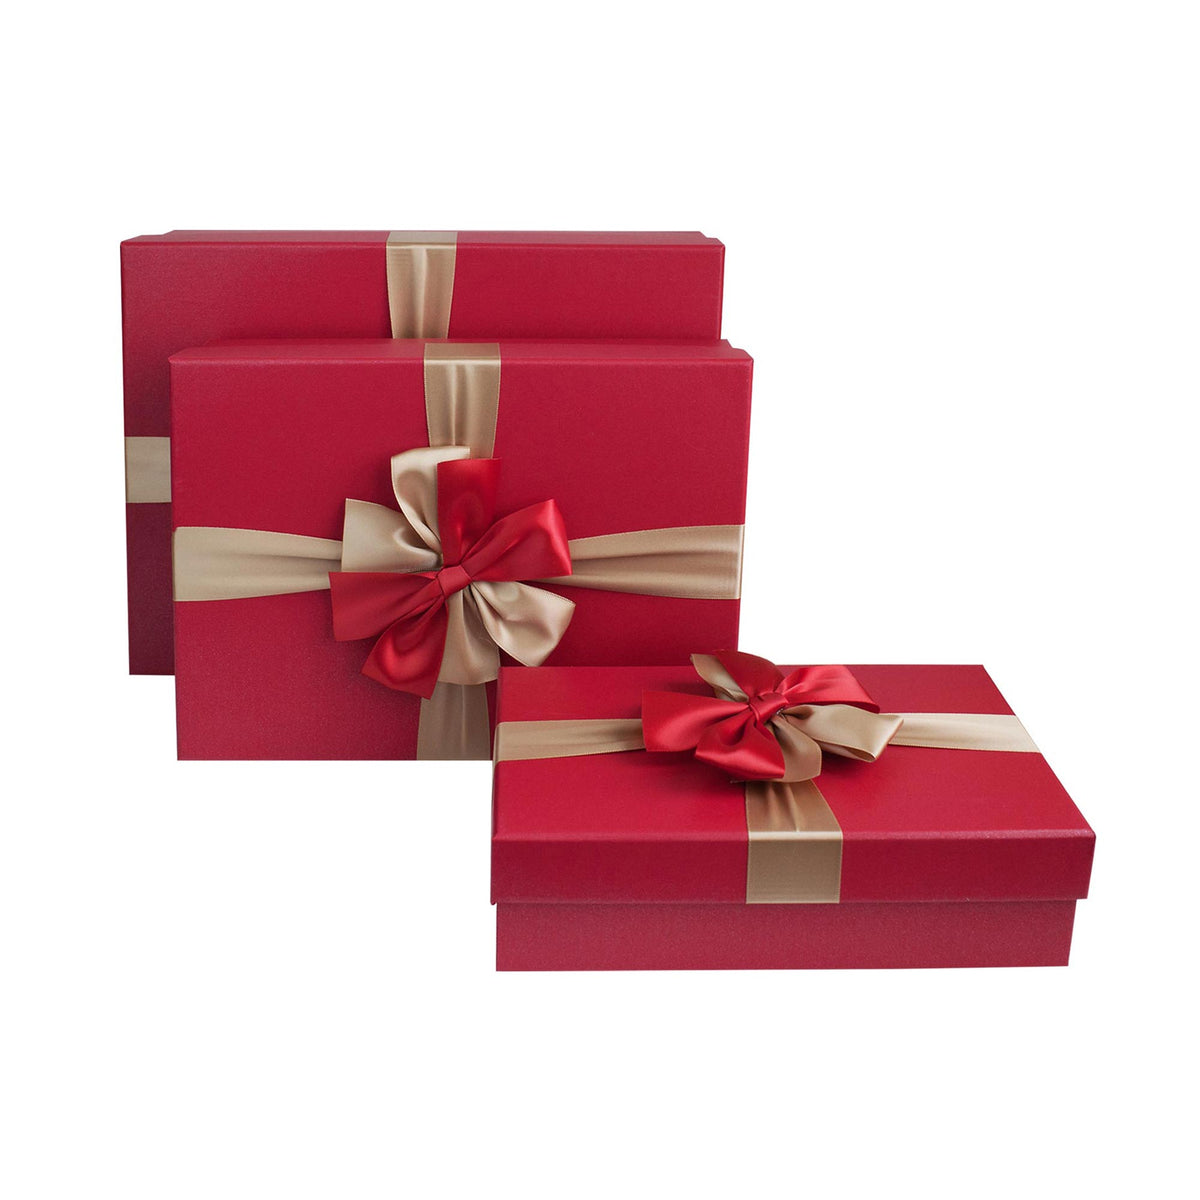 Luxury Red Gift Boxes - Set of 3 (Sizes Available)